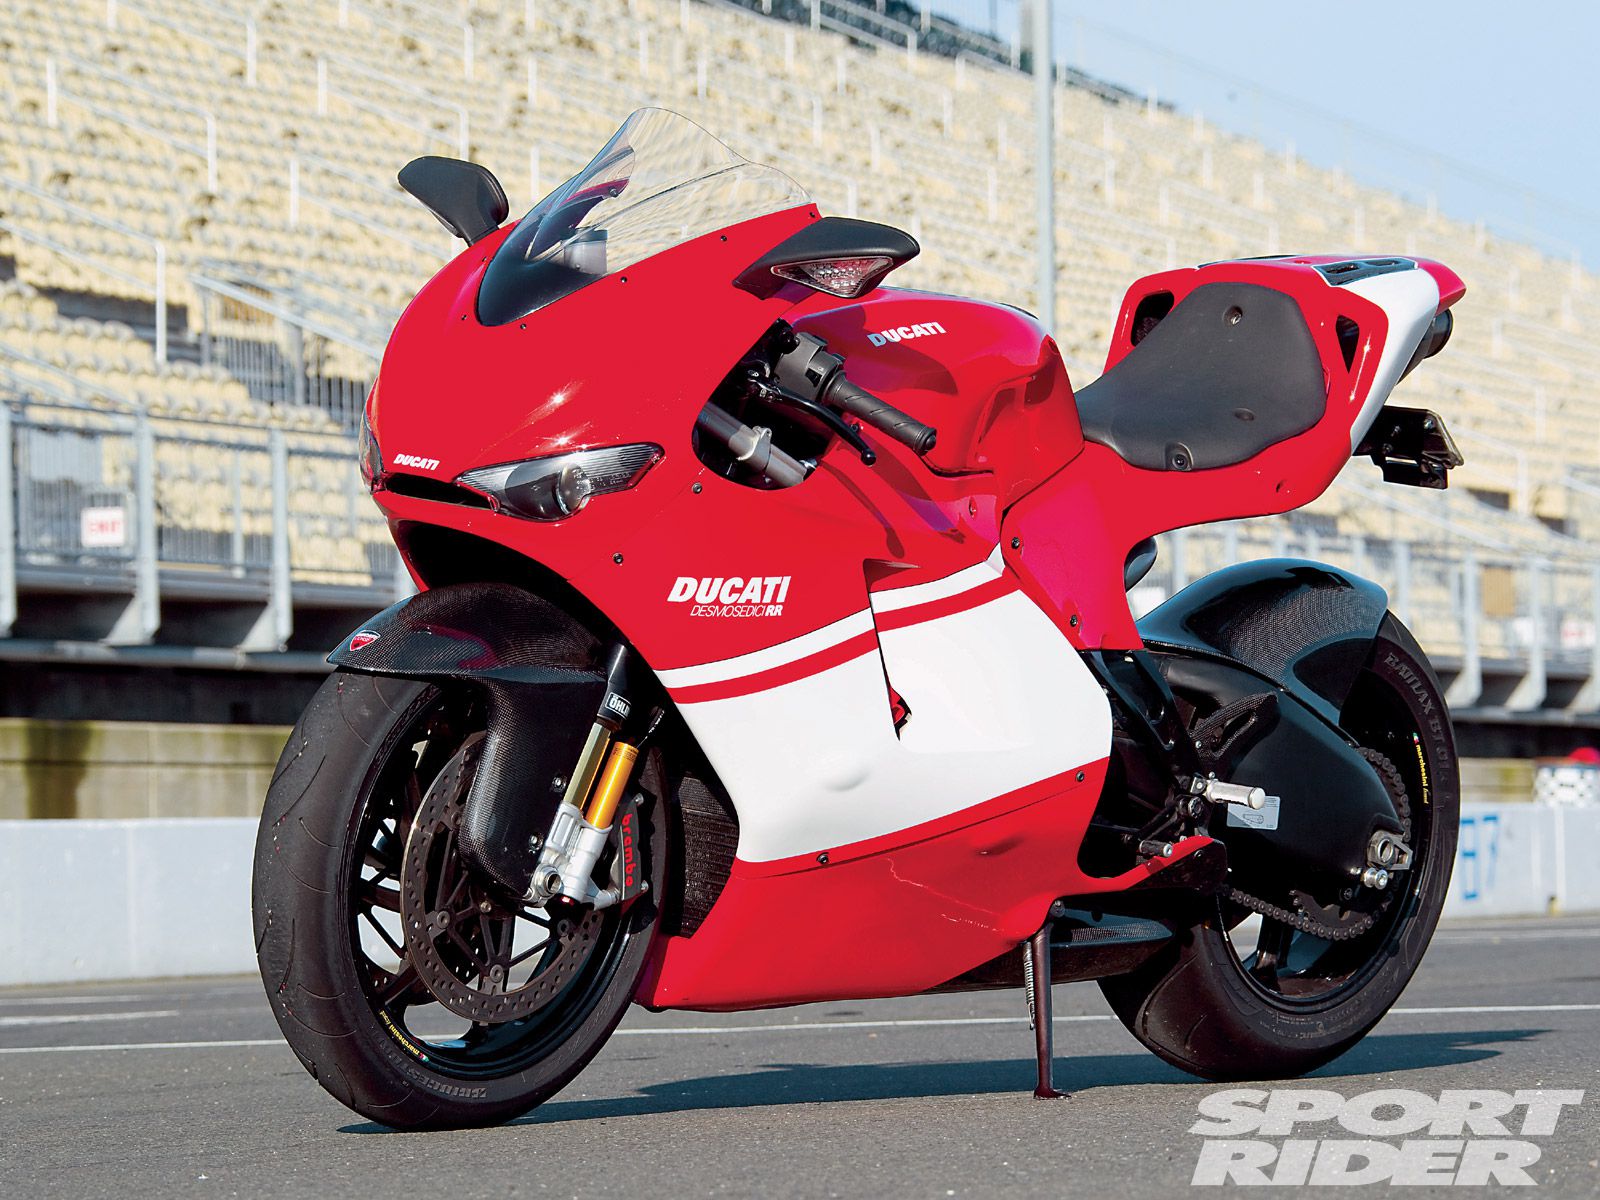 Ducati reveals specs on its 170 MPH racing electric motorcycle